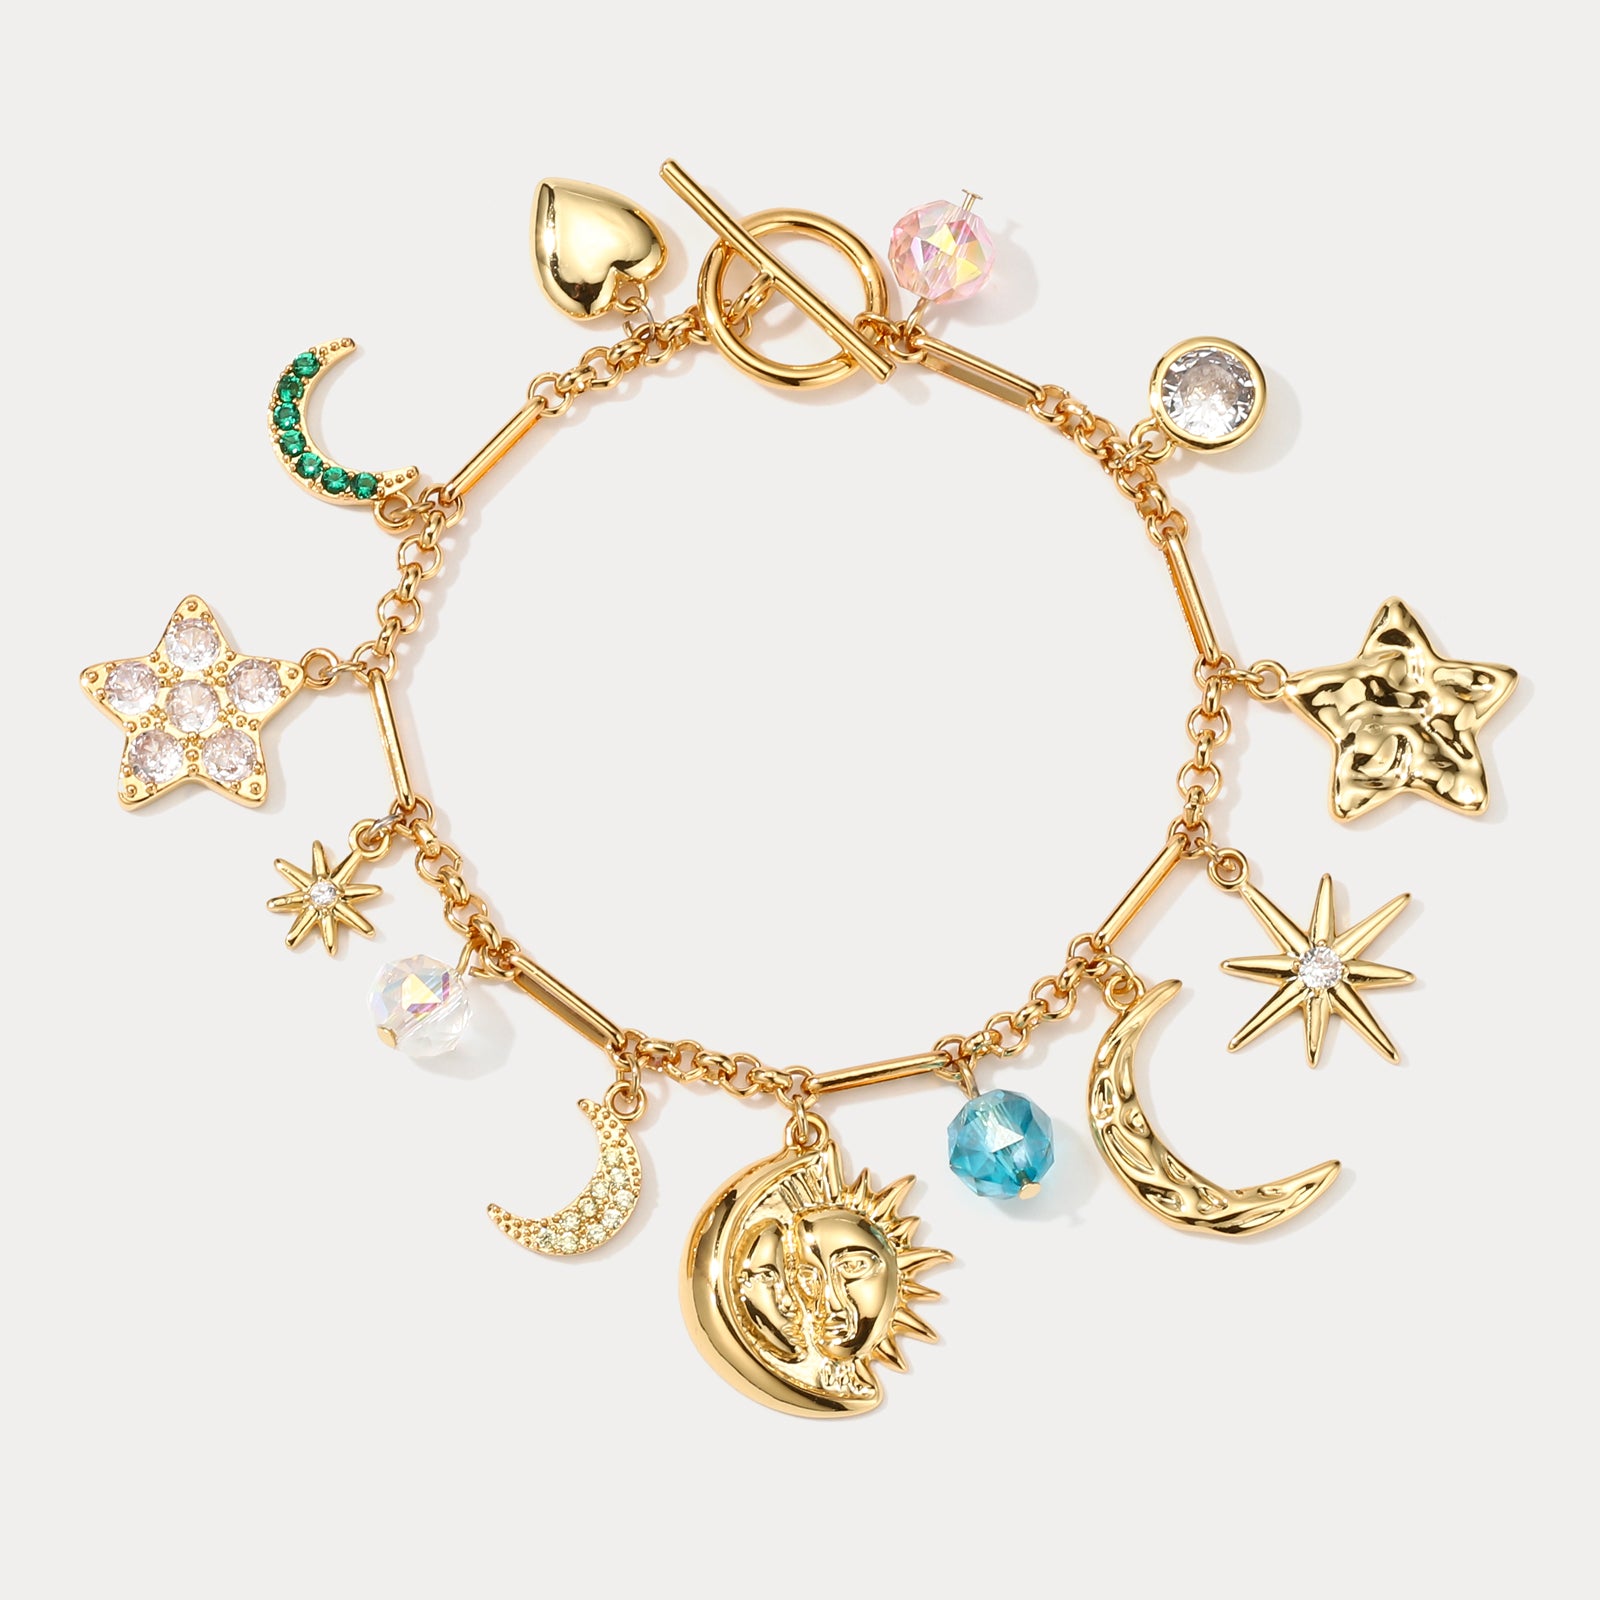 Selenichast Gold Moon And Star Mixed Charm Bracelet With Toggle Clasp For Women